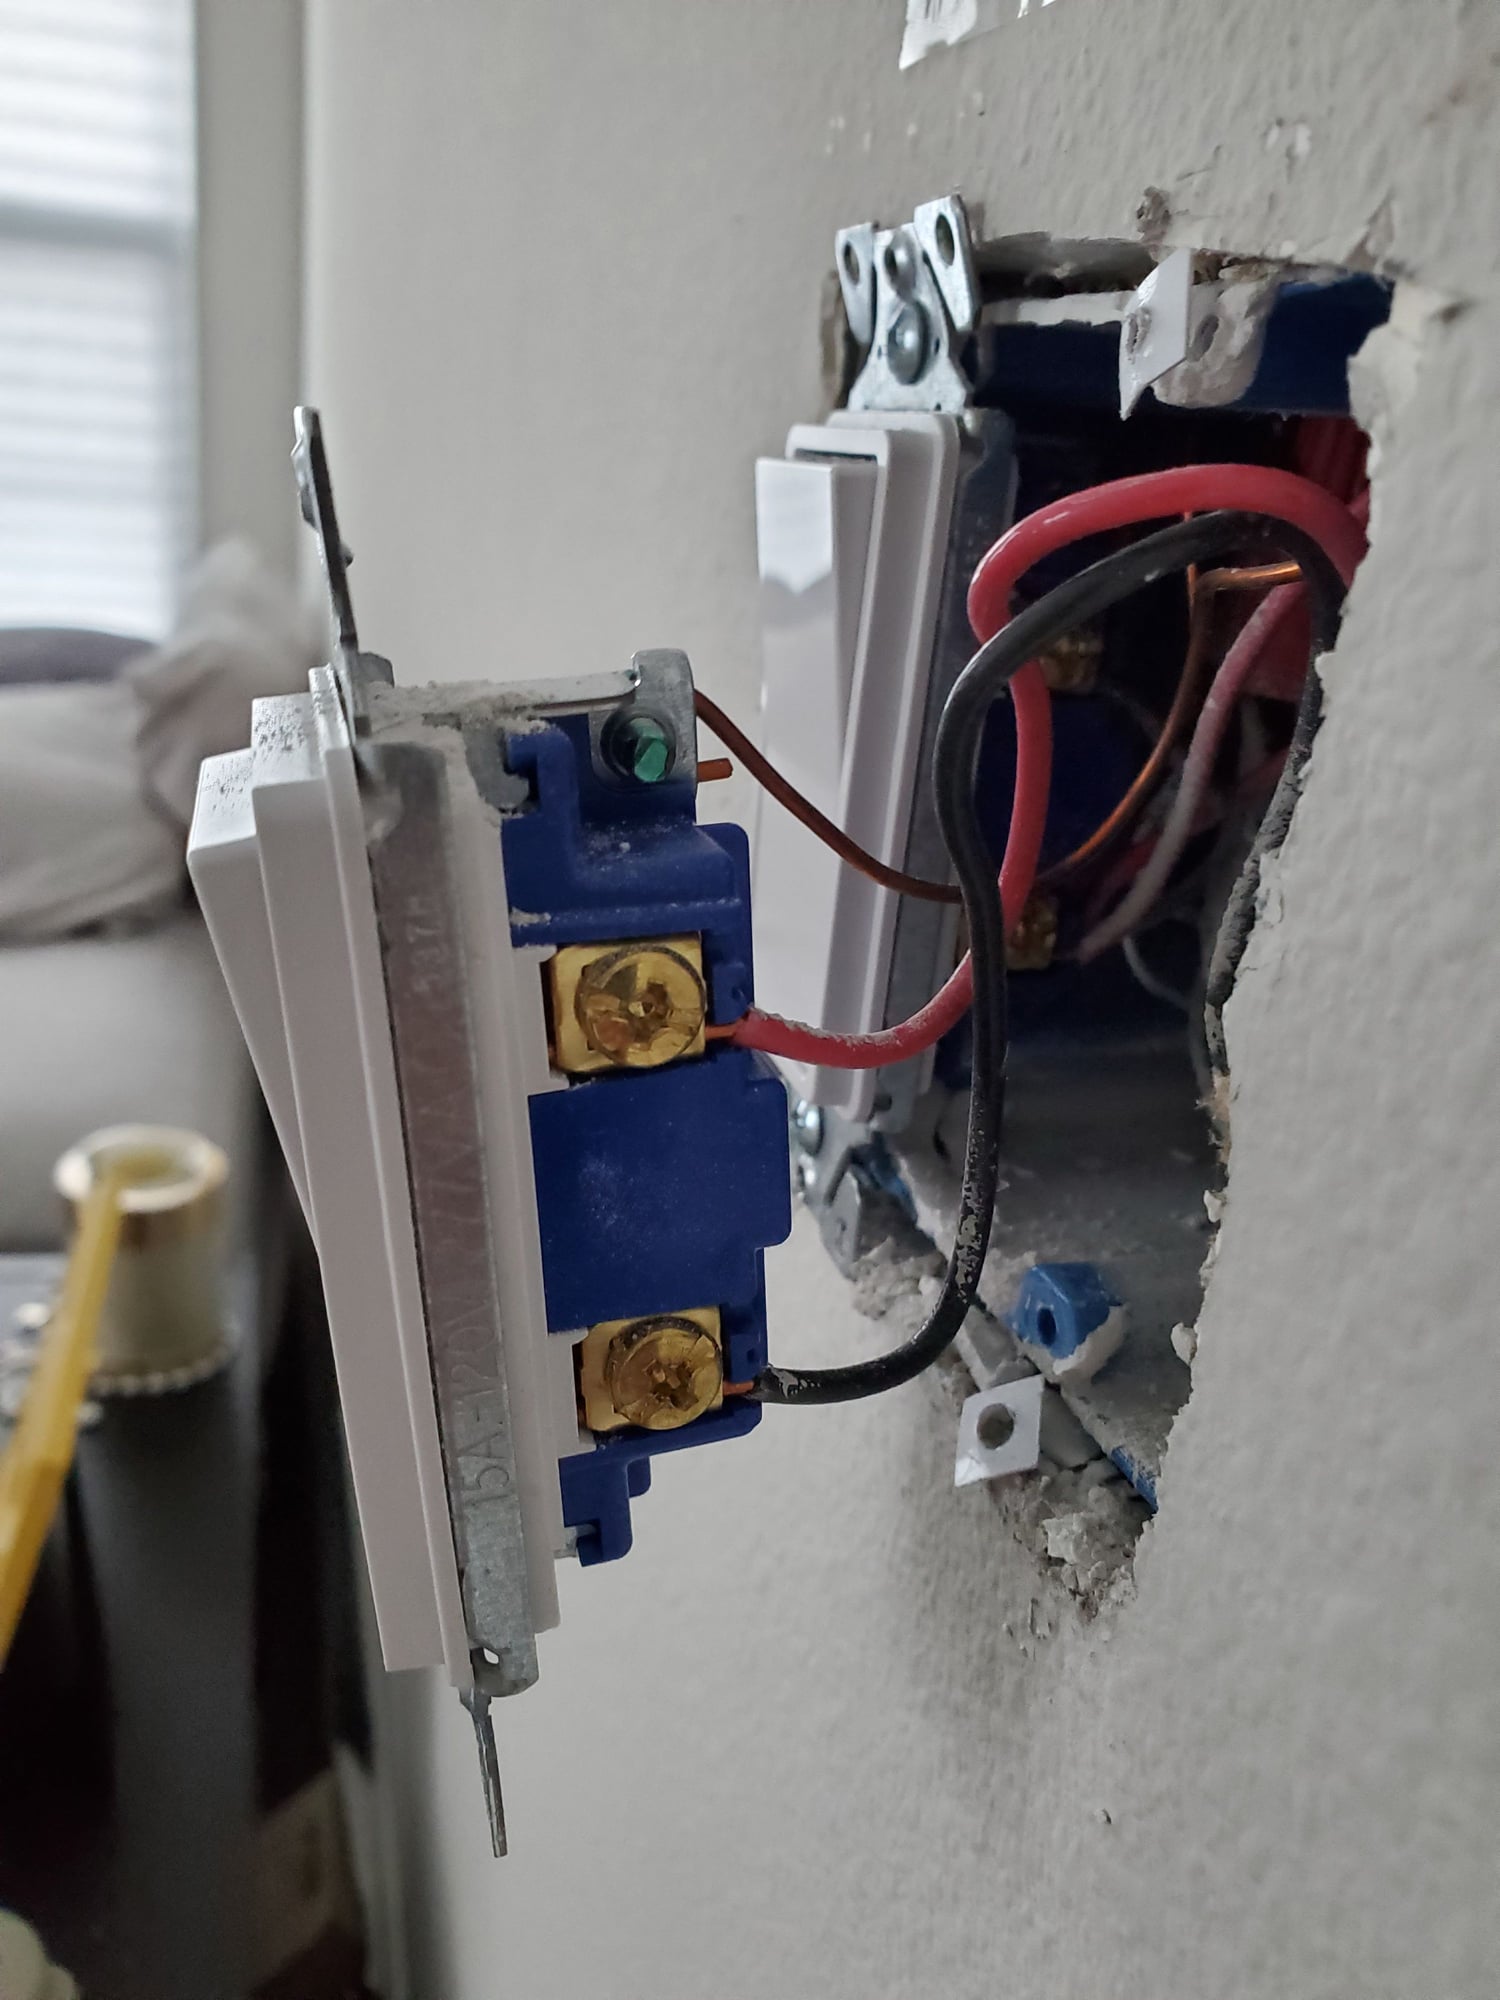 Re-wiring for new type of light switch - DoItYourself.com Community Forums